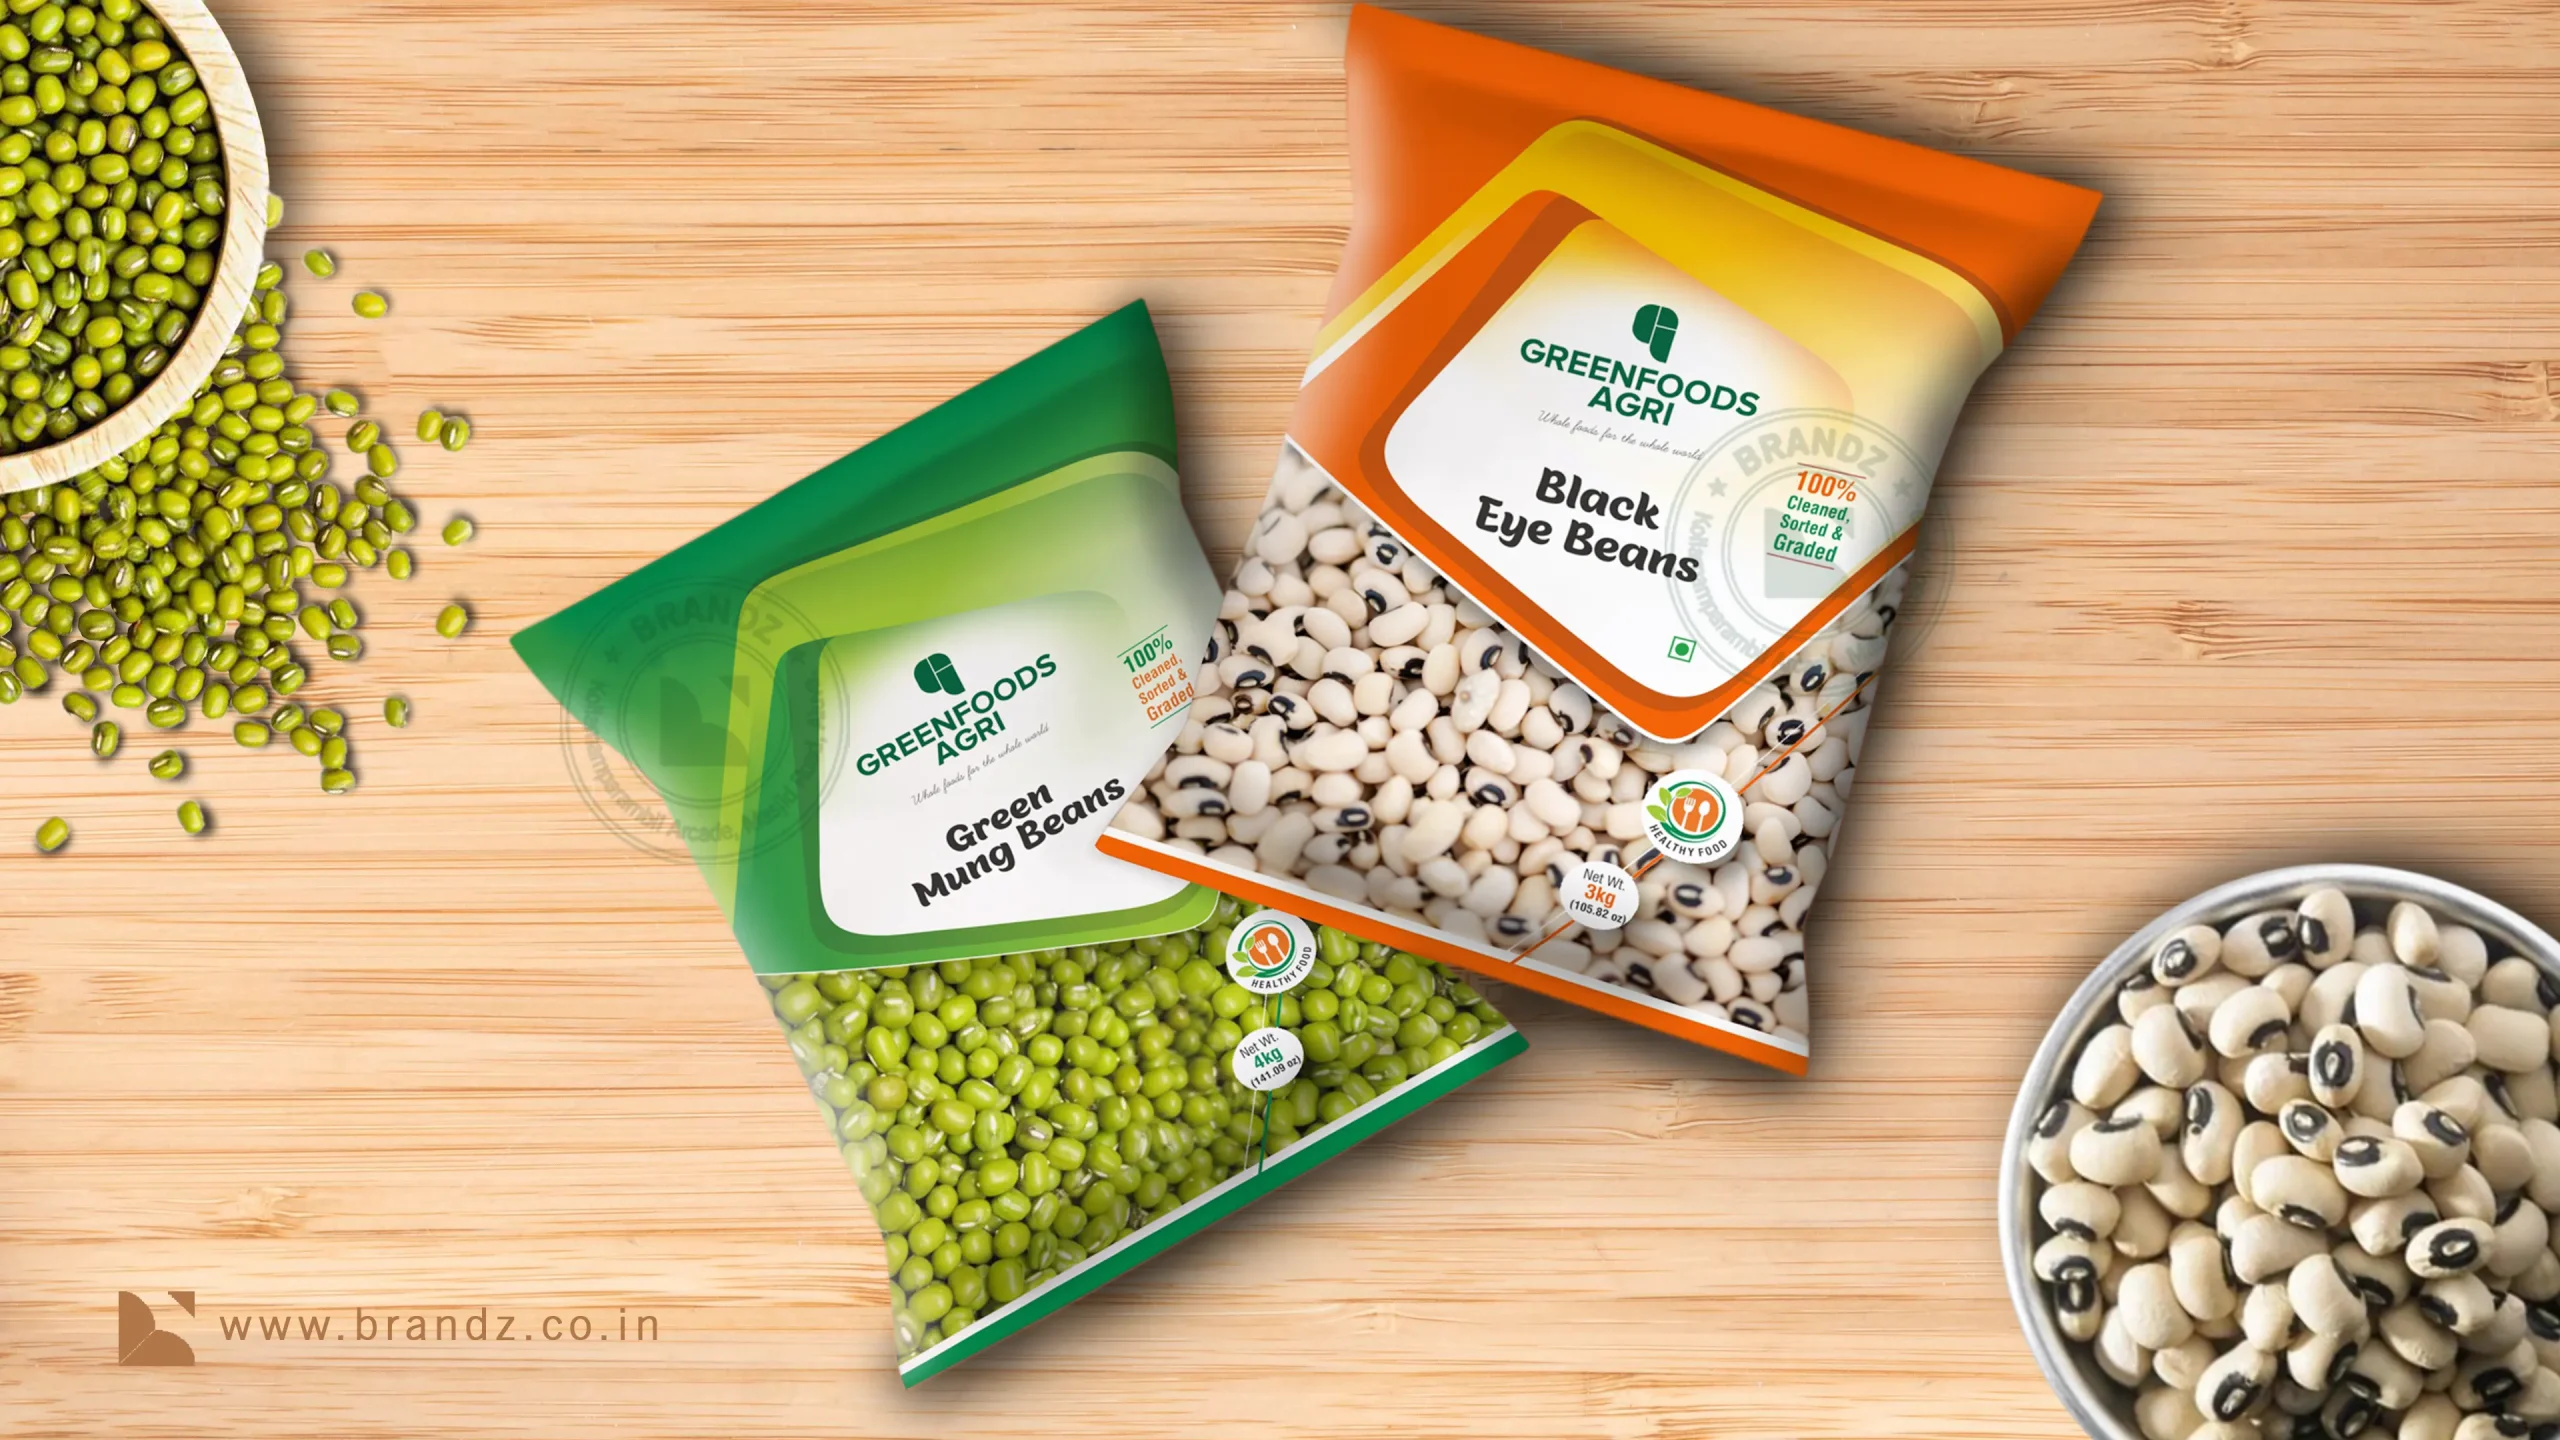 GREEN FOODS AGRI Pouch